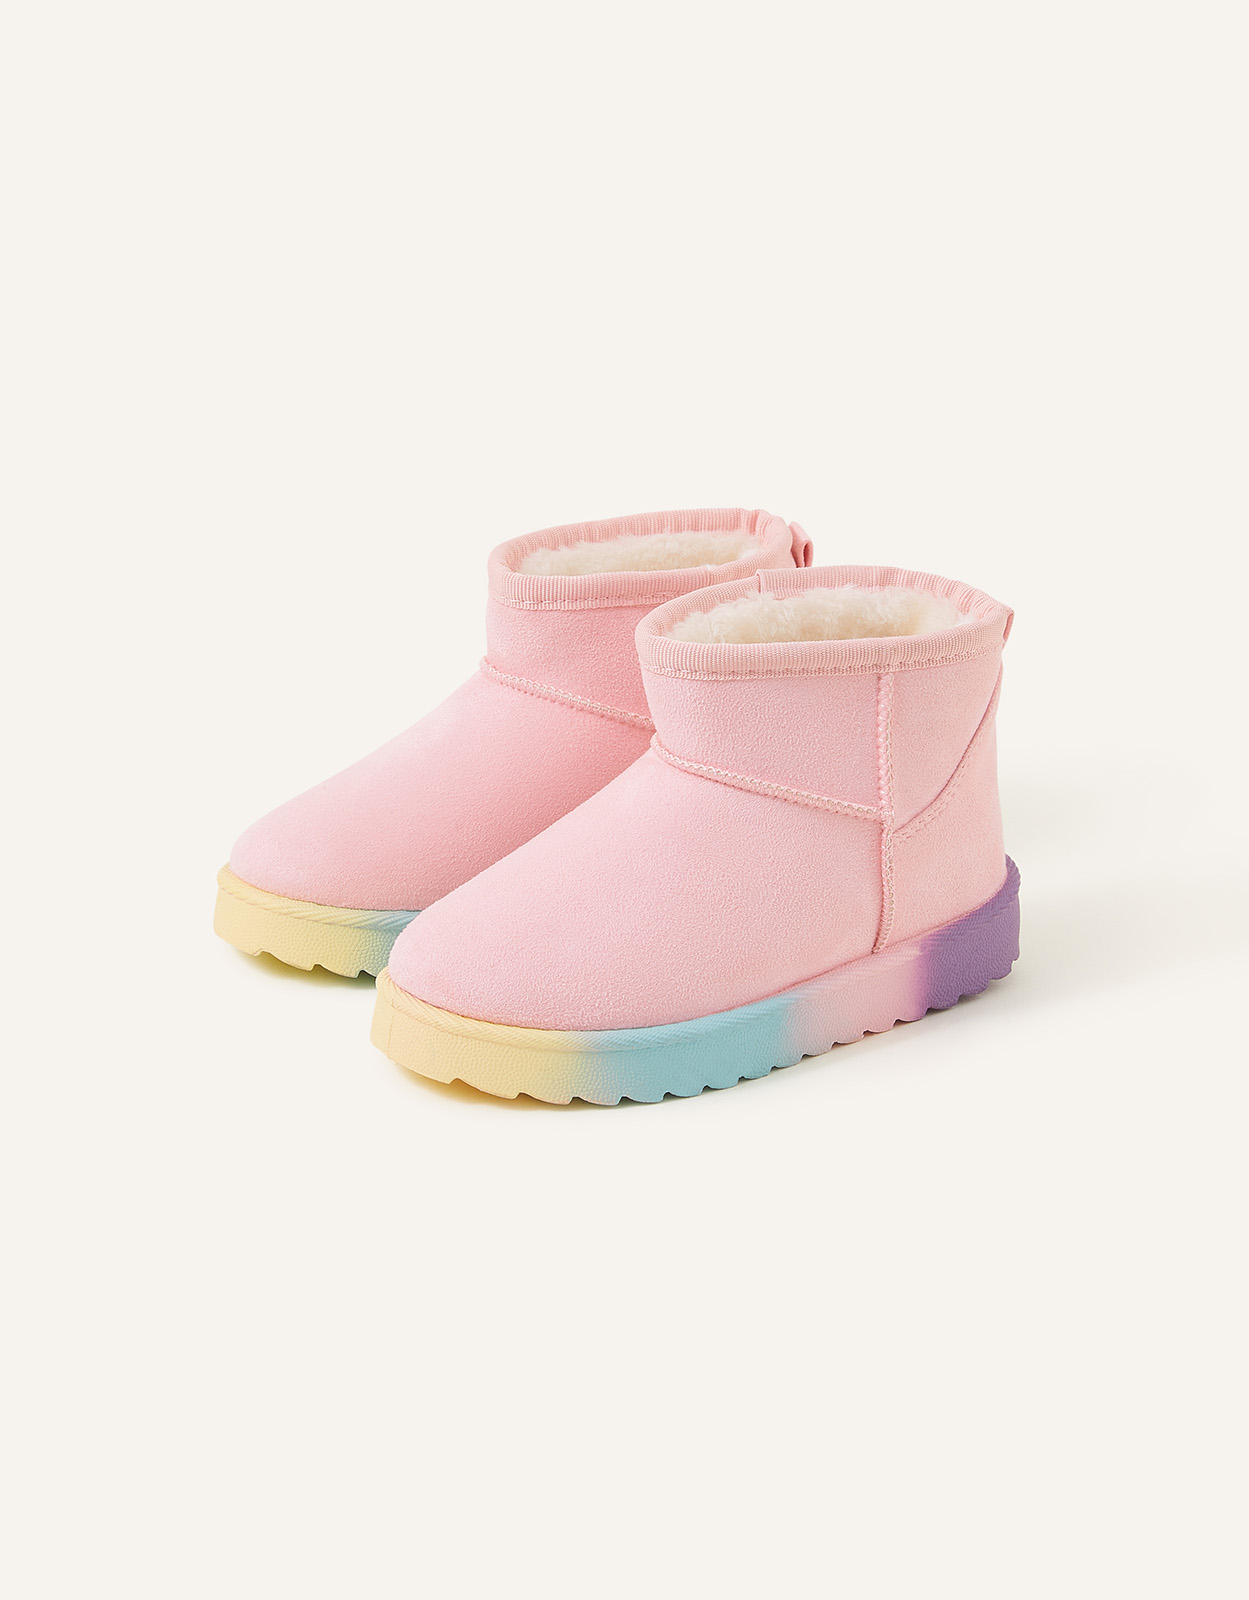 Accessorize Girl's Rainbow Sole Faux Suede Boots Pink, Size: 8